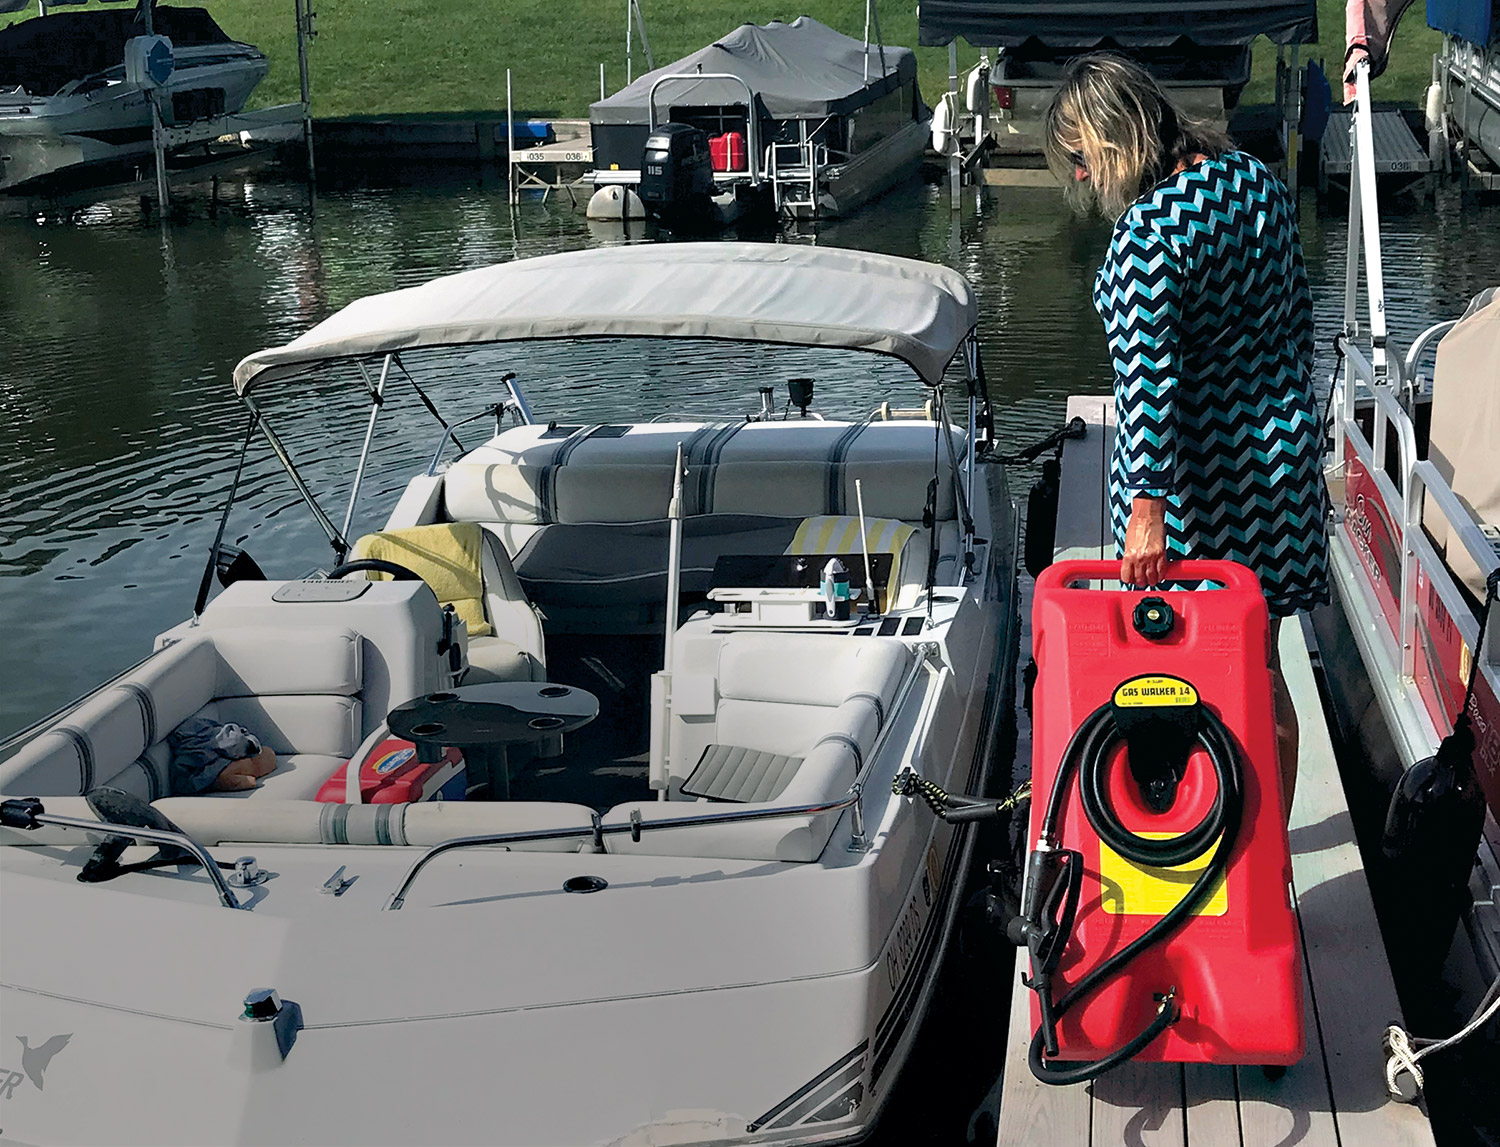 A woman on a dock landing area carries/drags the red/black/yellow colored Moeller Gas Walker 14 Portable Quick-Fill Fuel Station tank to the family deck boat beside her